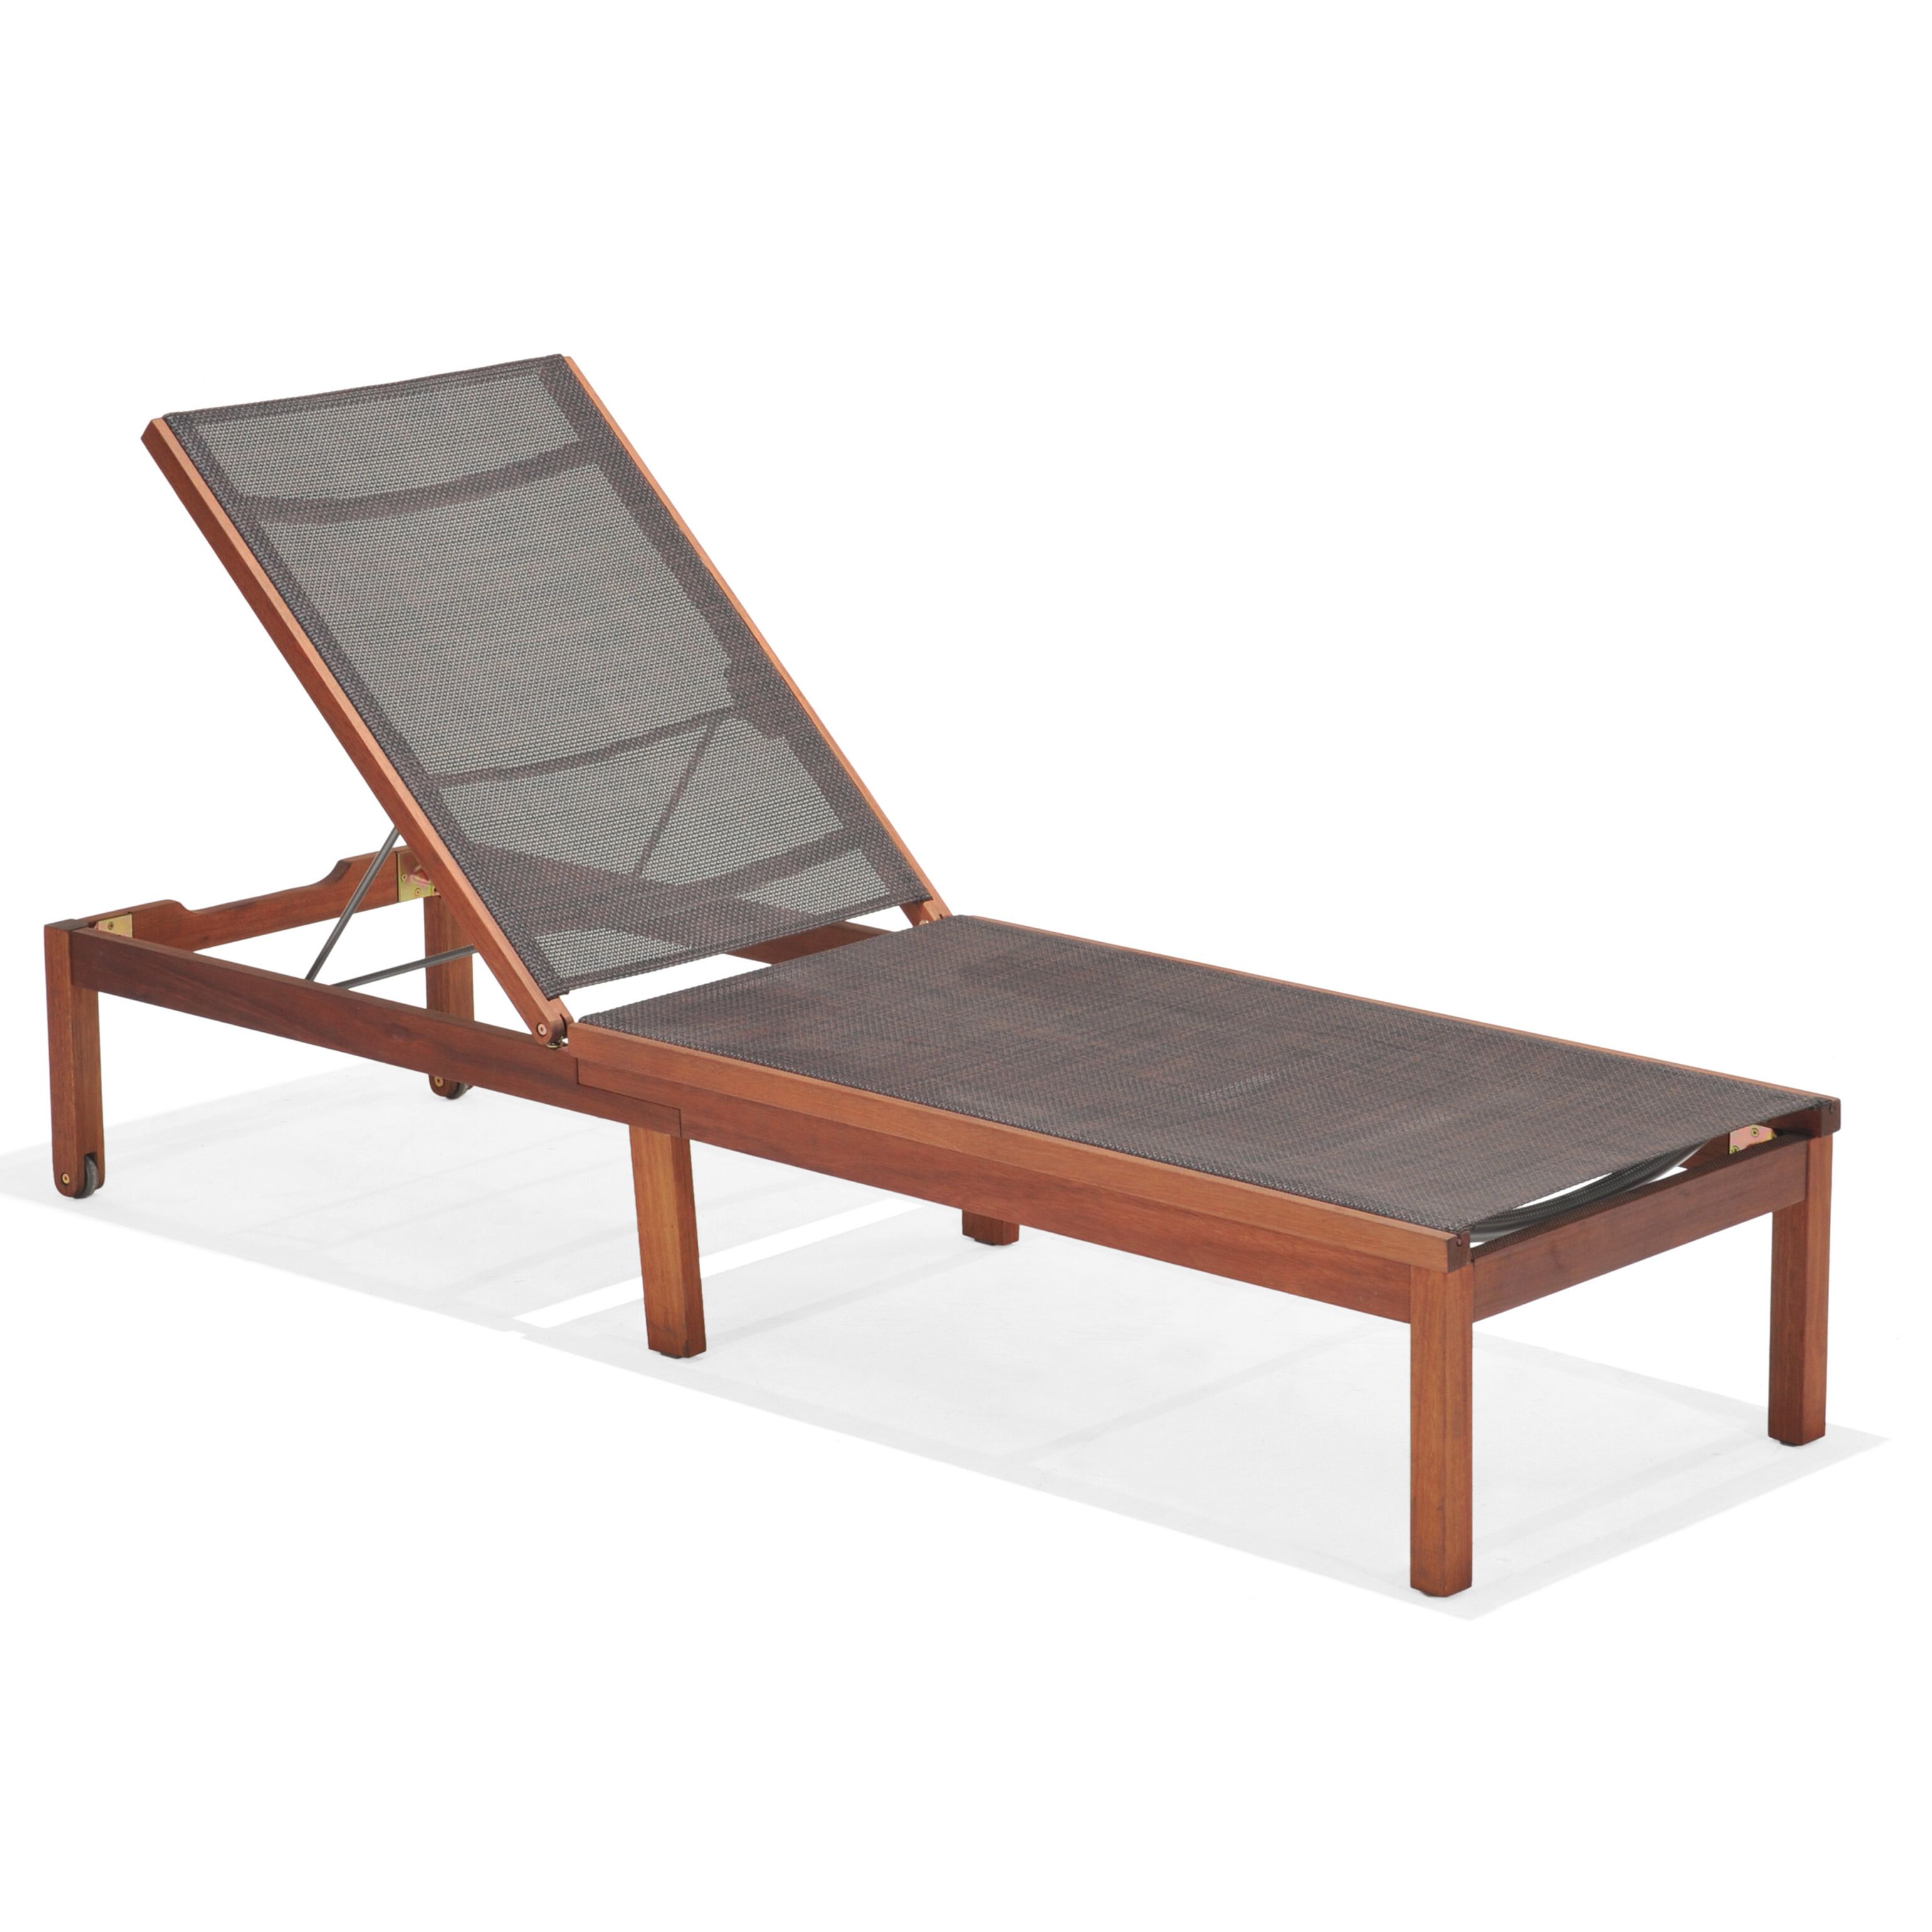 2020 Fabric Reclining Outdoor Chaise Lounges With Regard To Hillsford Reclining Chaise Lounge (View 16 of 25)